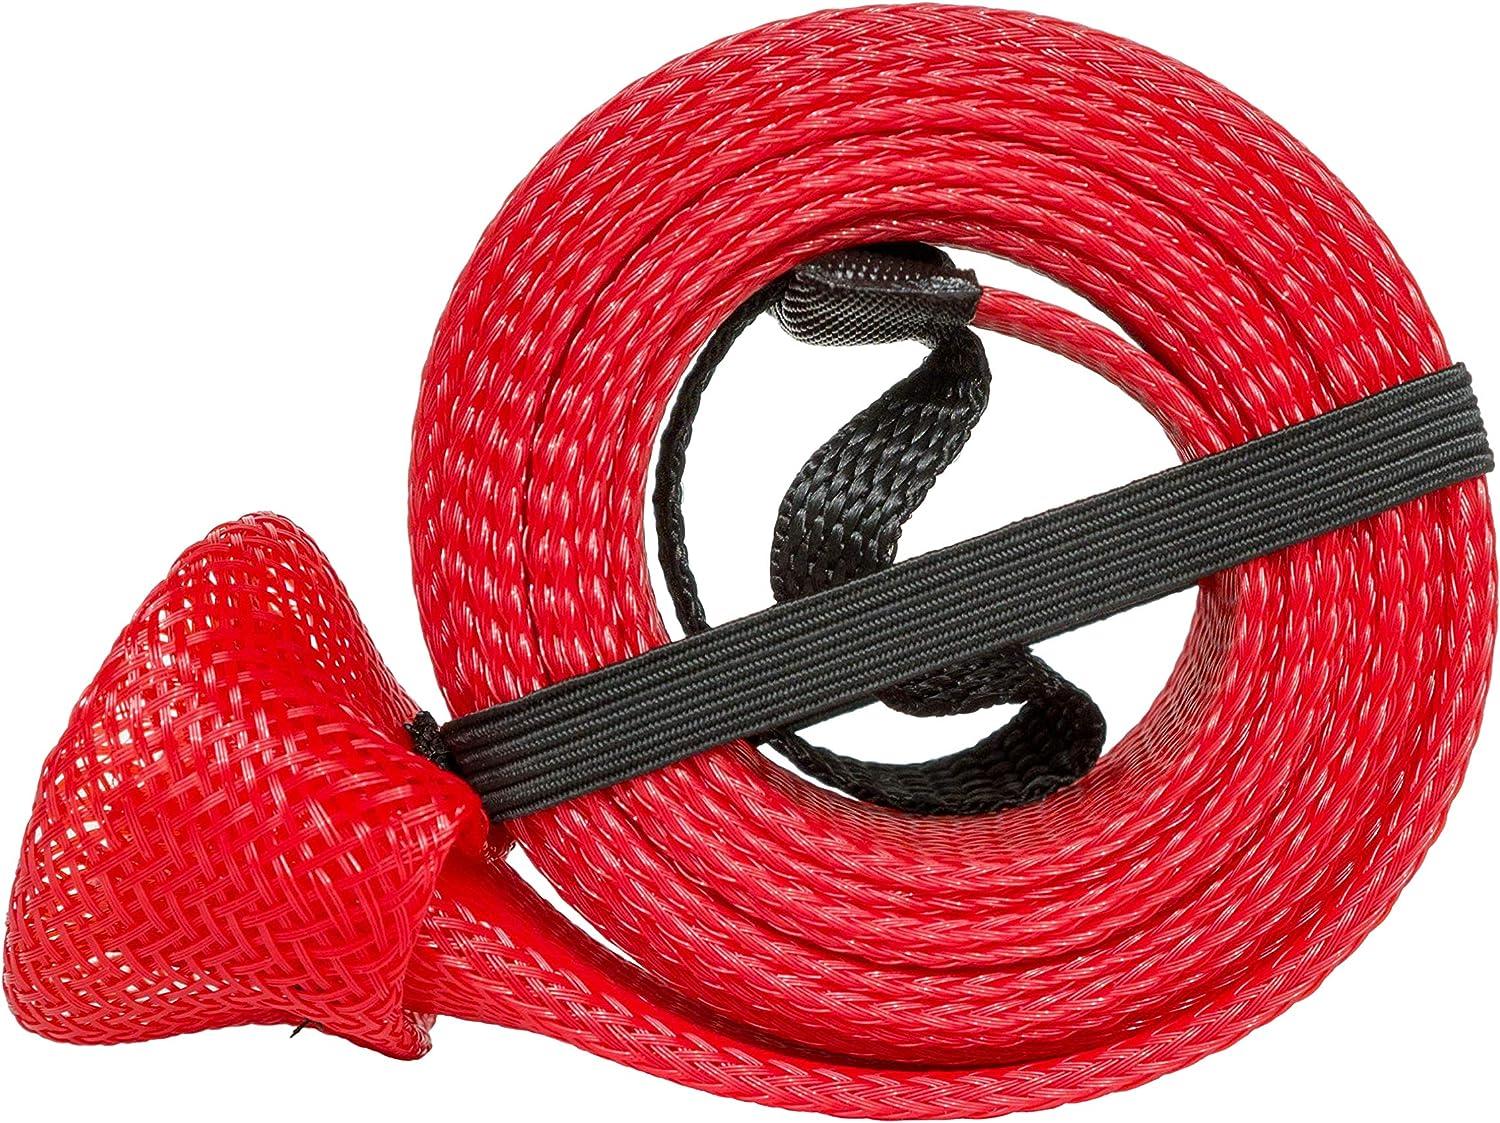  DynoGoods Fishing Rod Straps for Casting, Spinning